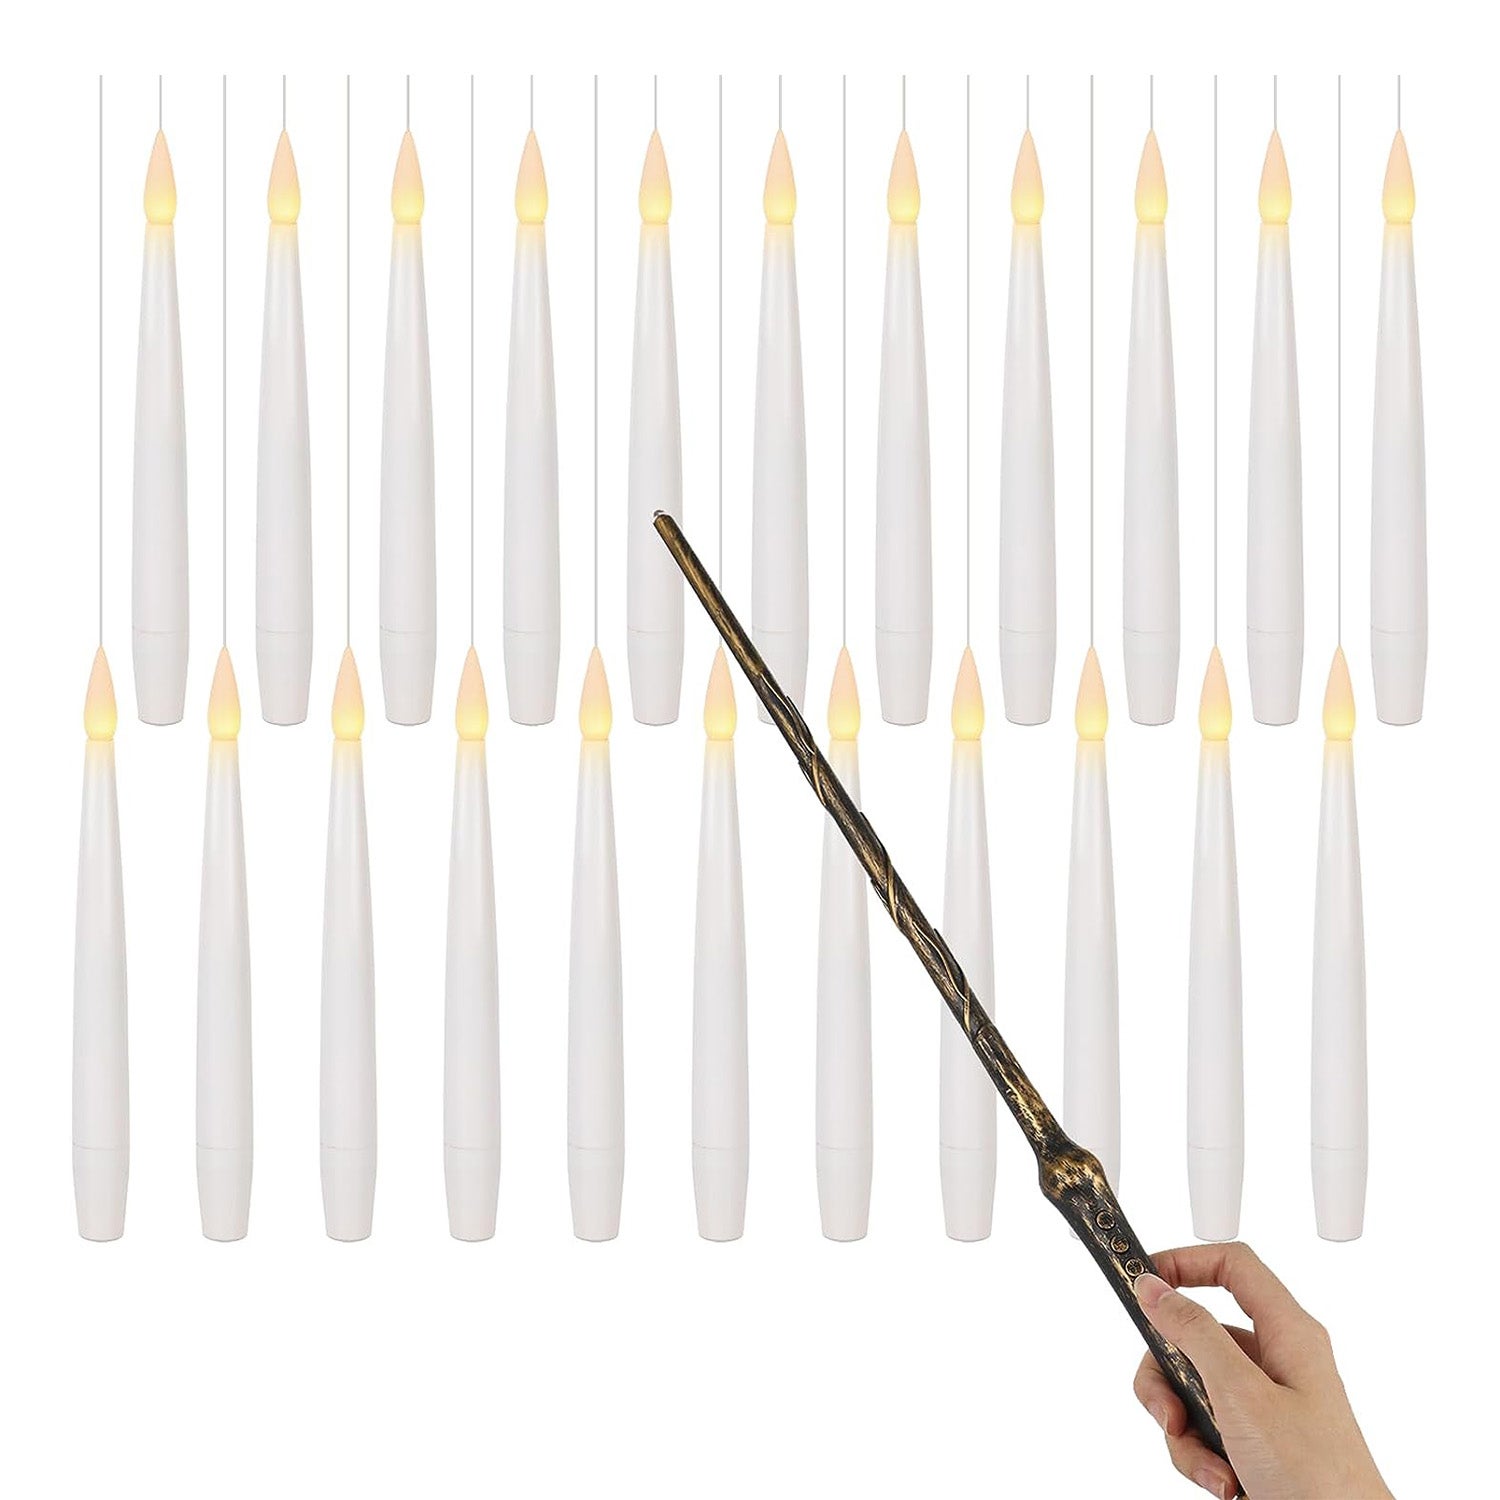 GenSwin 22pcs Flameless Taper Floating Candles with Magic Wand Remote